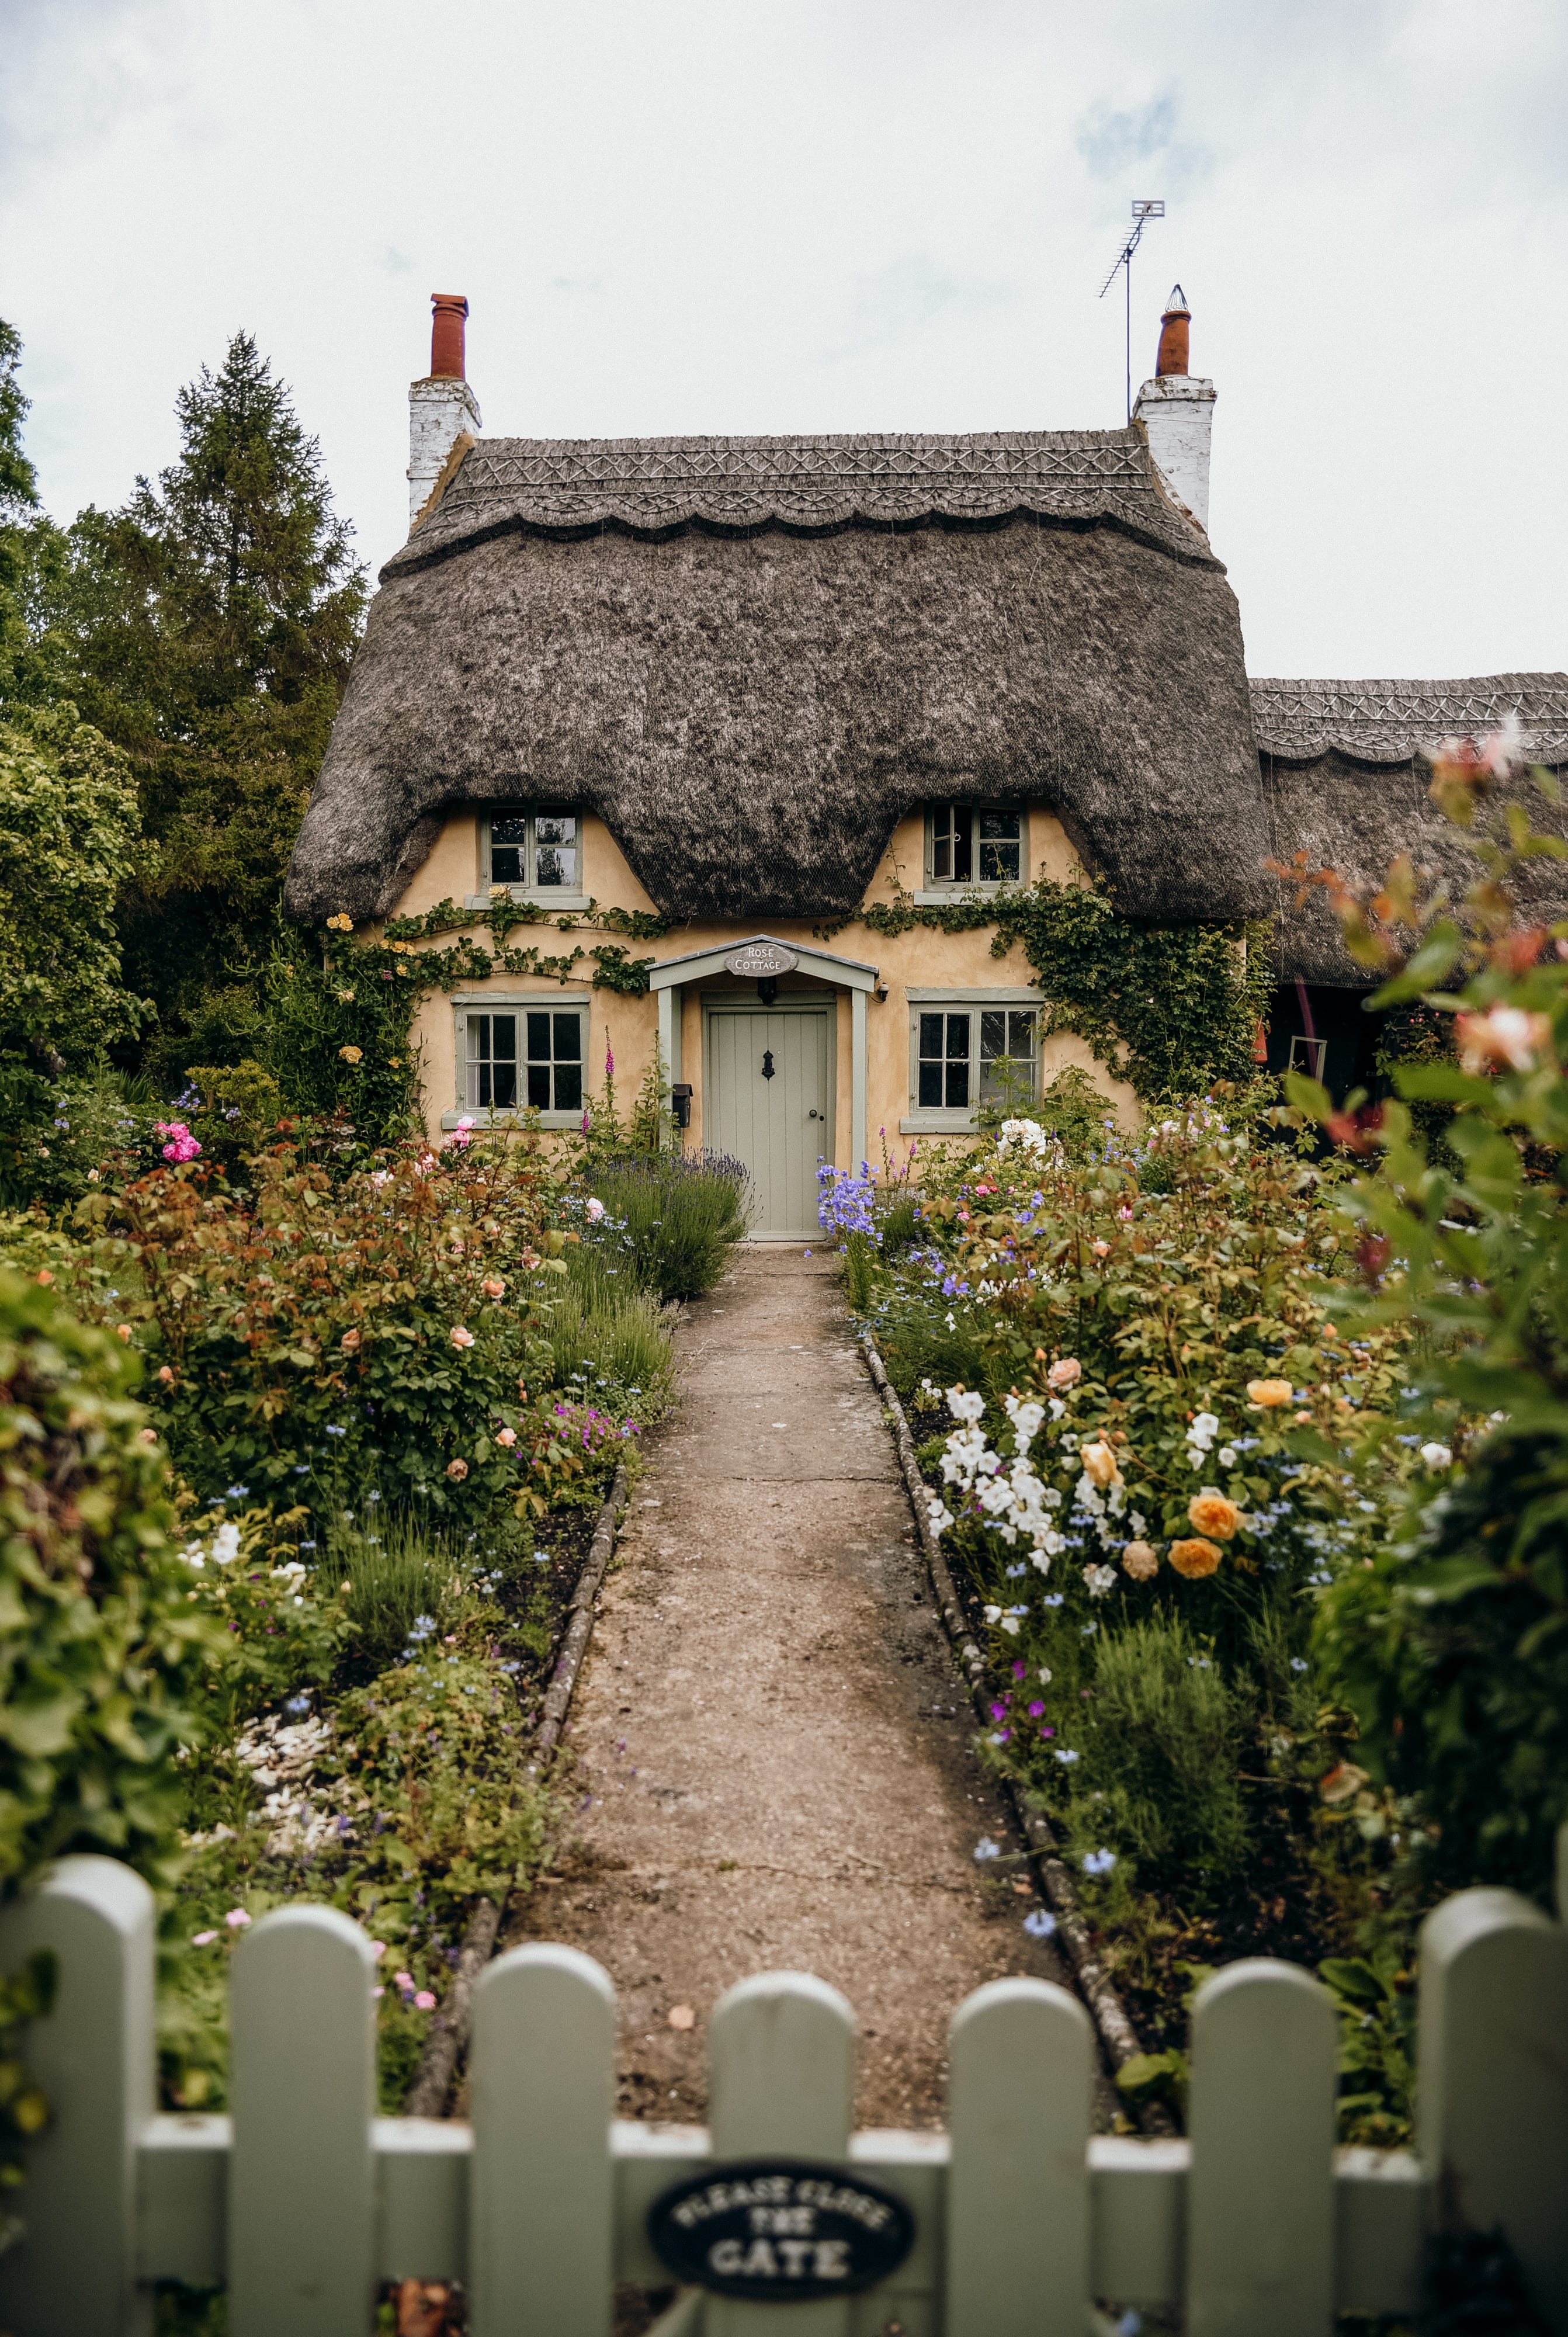 The Most Beautiful Villages In The Cotswolds, England